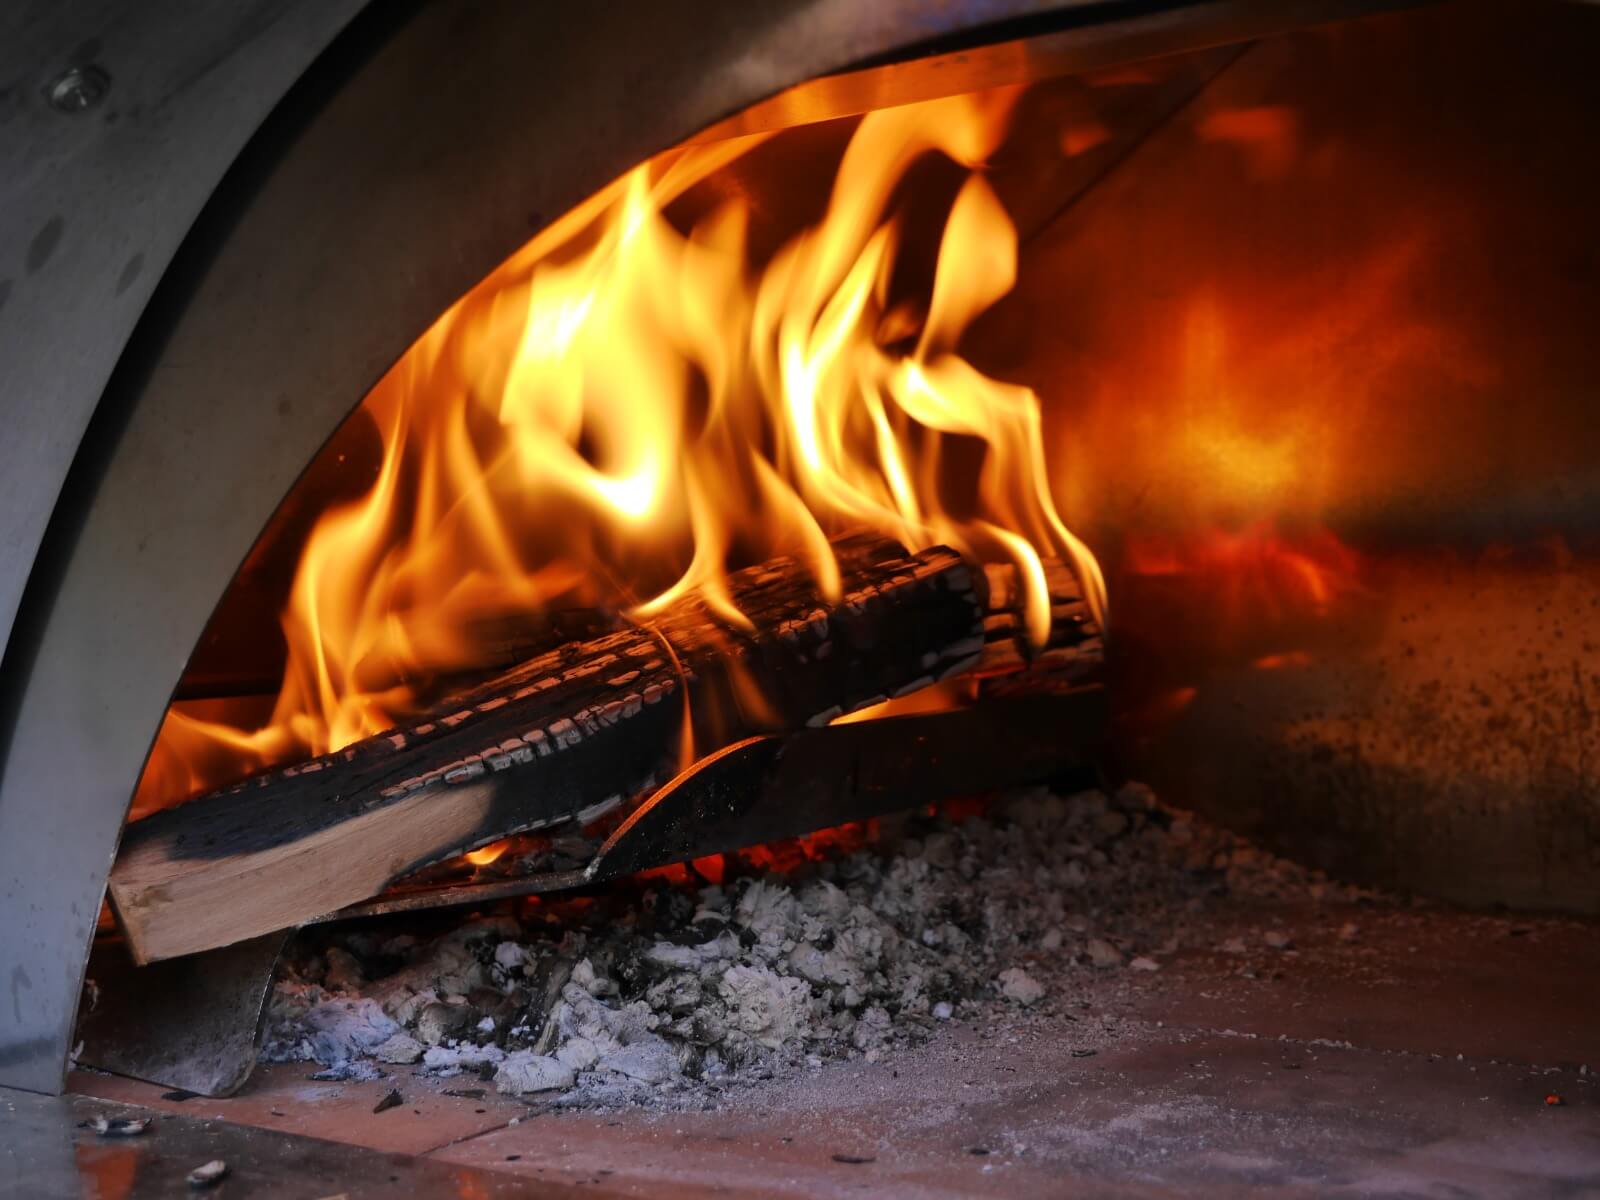 Wood fired outdoor pizza ovens, accessories to heat up summer